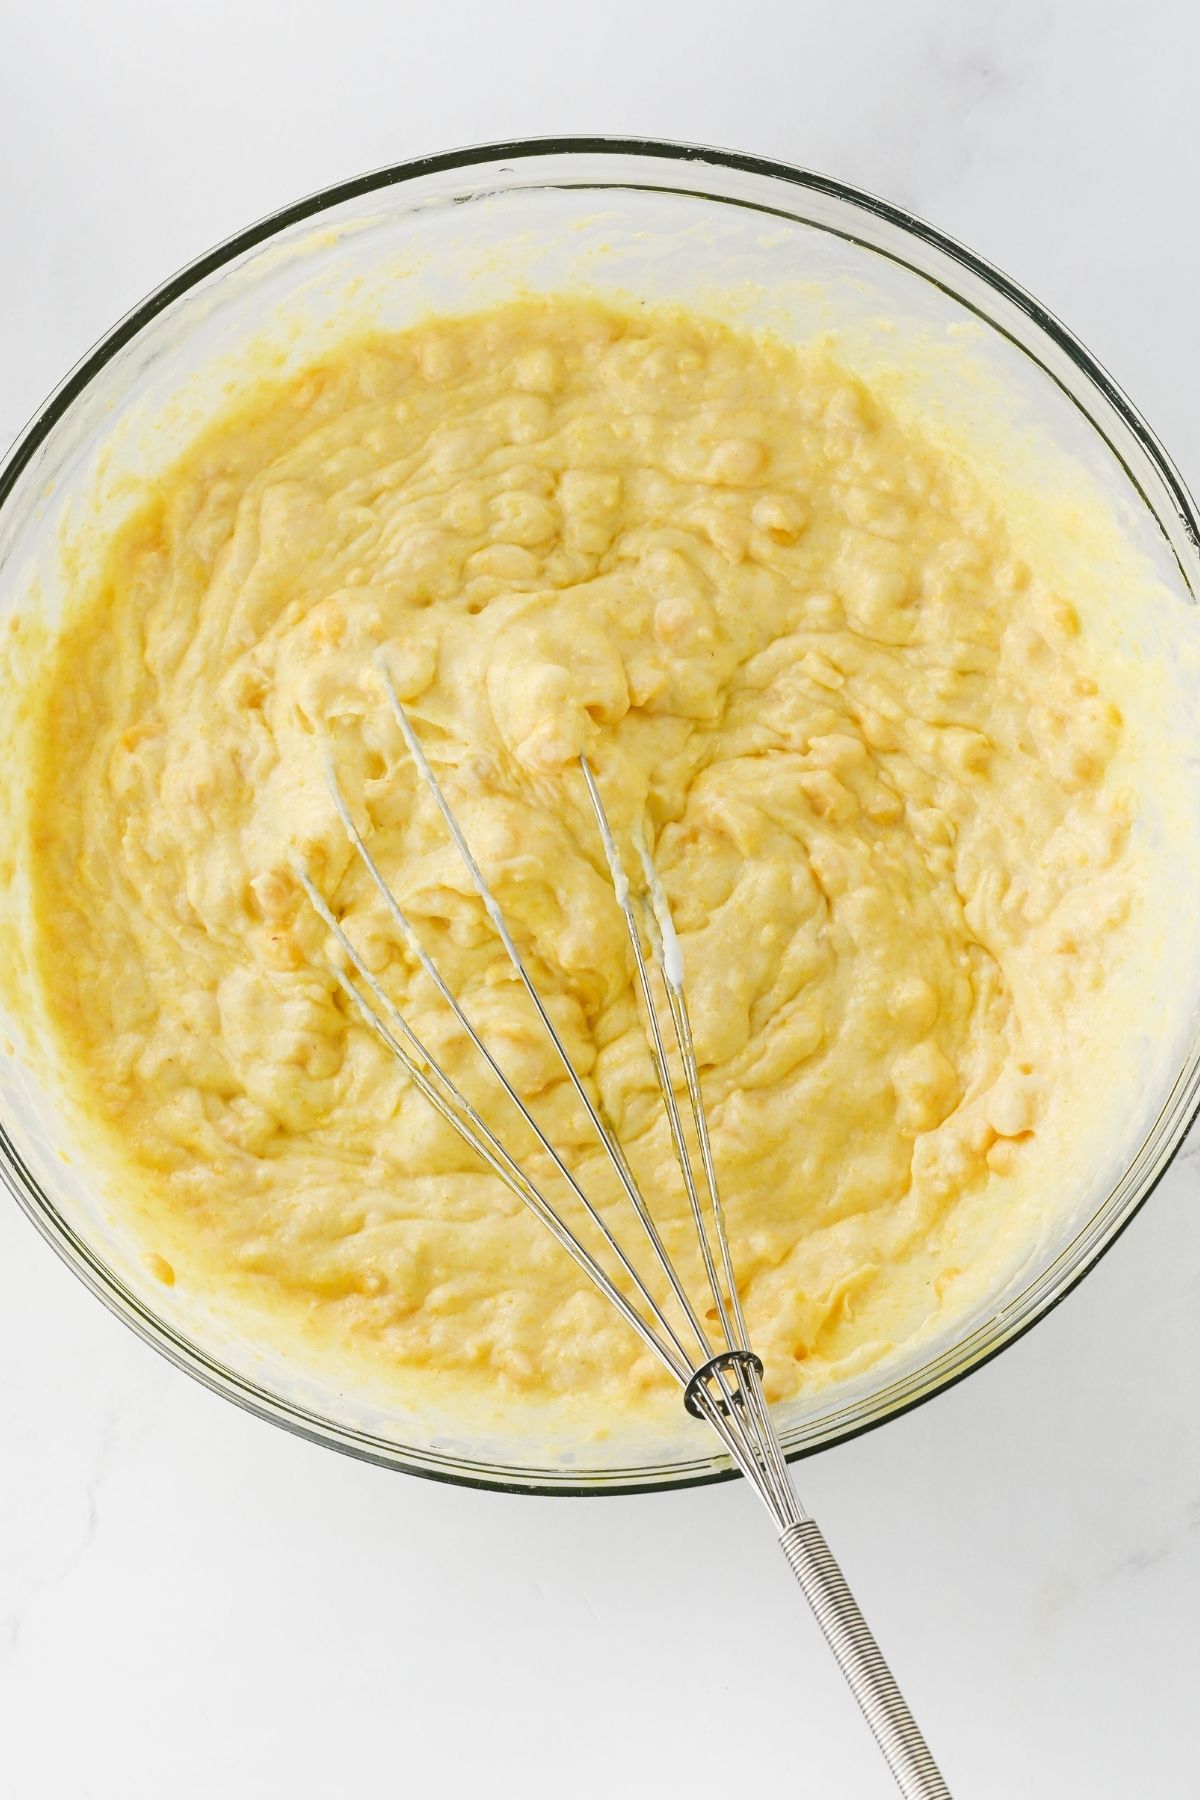 Cornbread casserole being mixed in a glass mixing bowl.